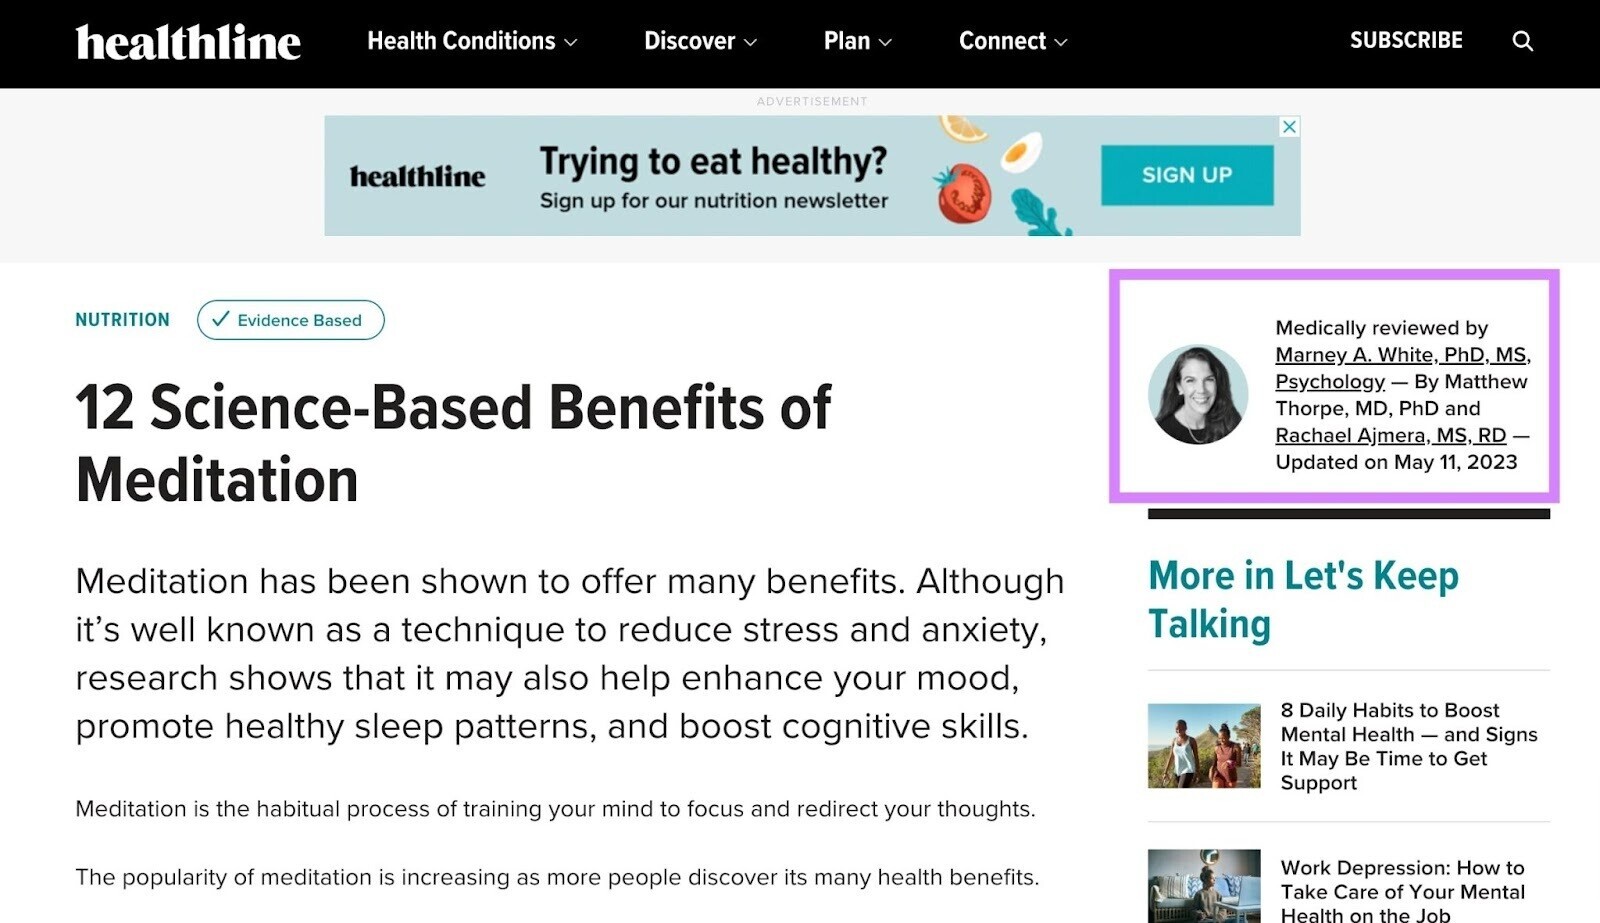 Healthline shows it’s article is reviewed by a qualified medical professional